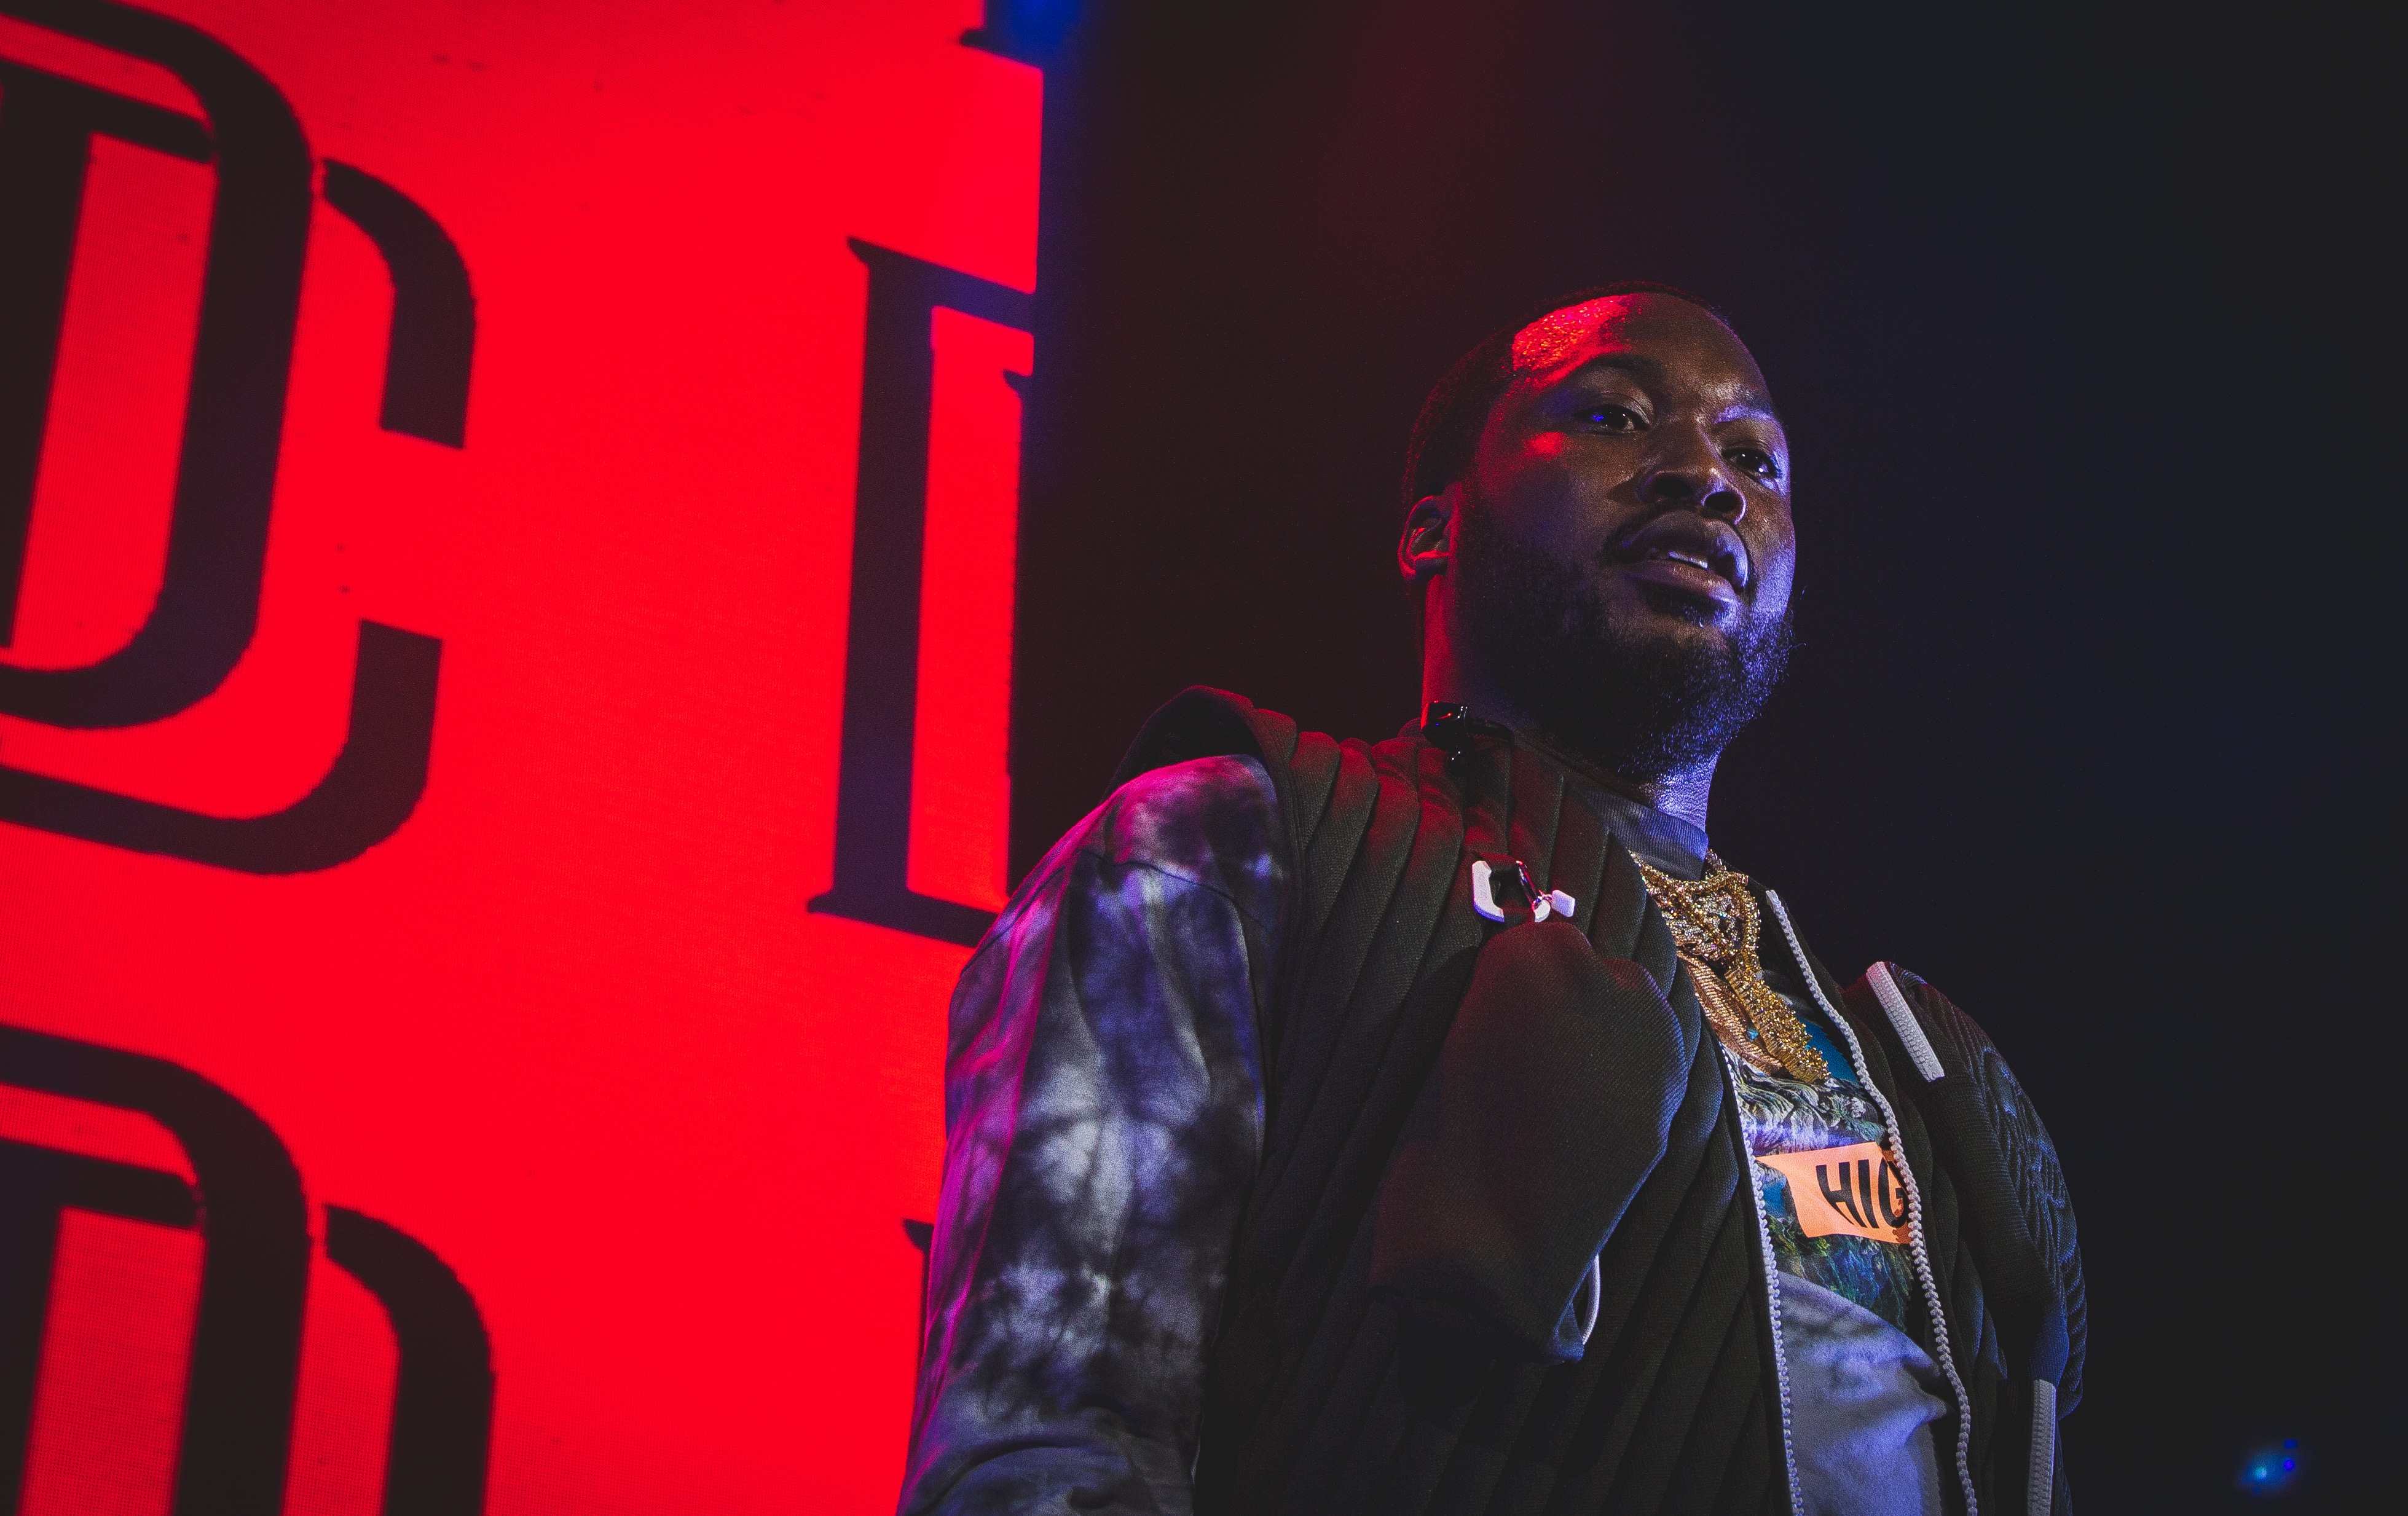 <div>Meek Mill Calls DJ Drama An “Industry Lame”& Goofy Following Podcast Remarks, Twitter Reacts</div>